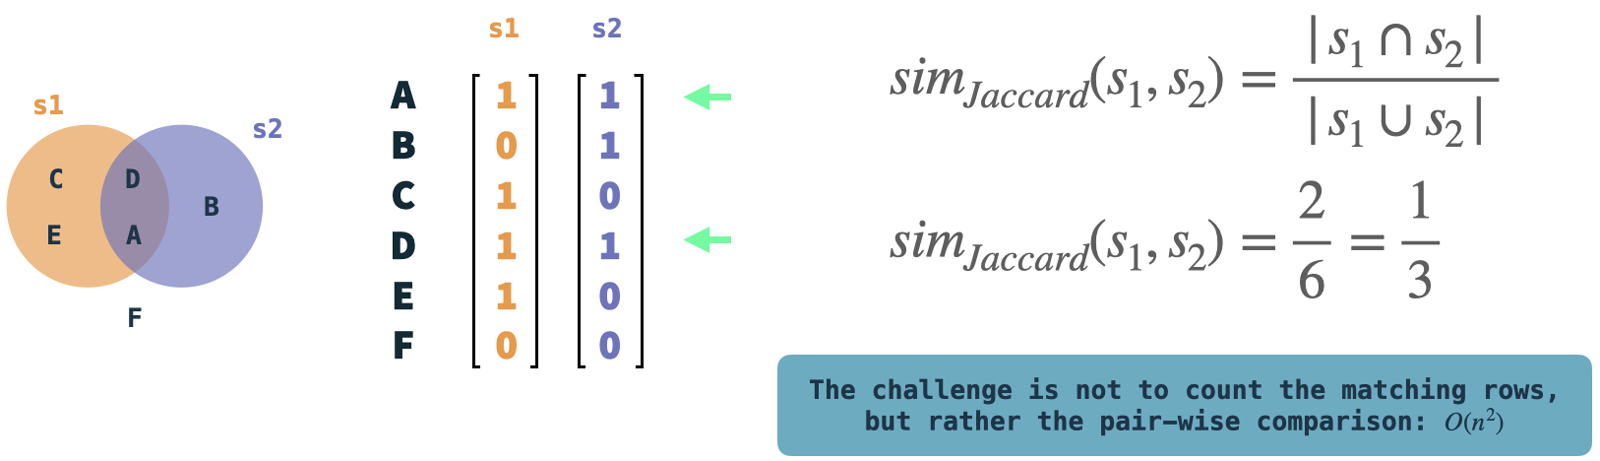 The Jaccard similarity measures similarity of sets, which can also be encoded as binary vectors. Image by author.